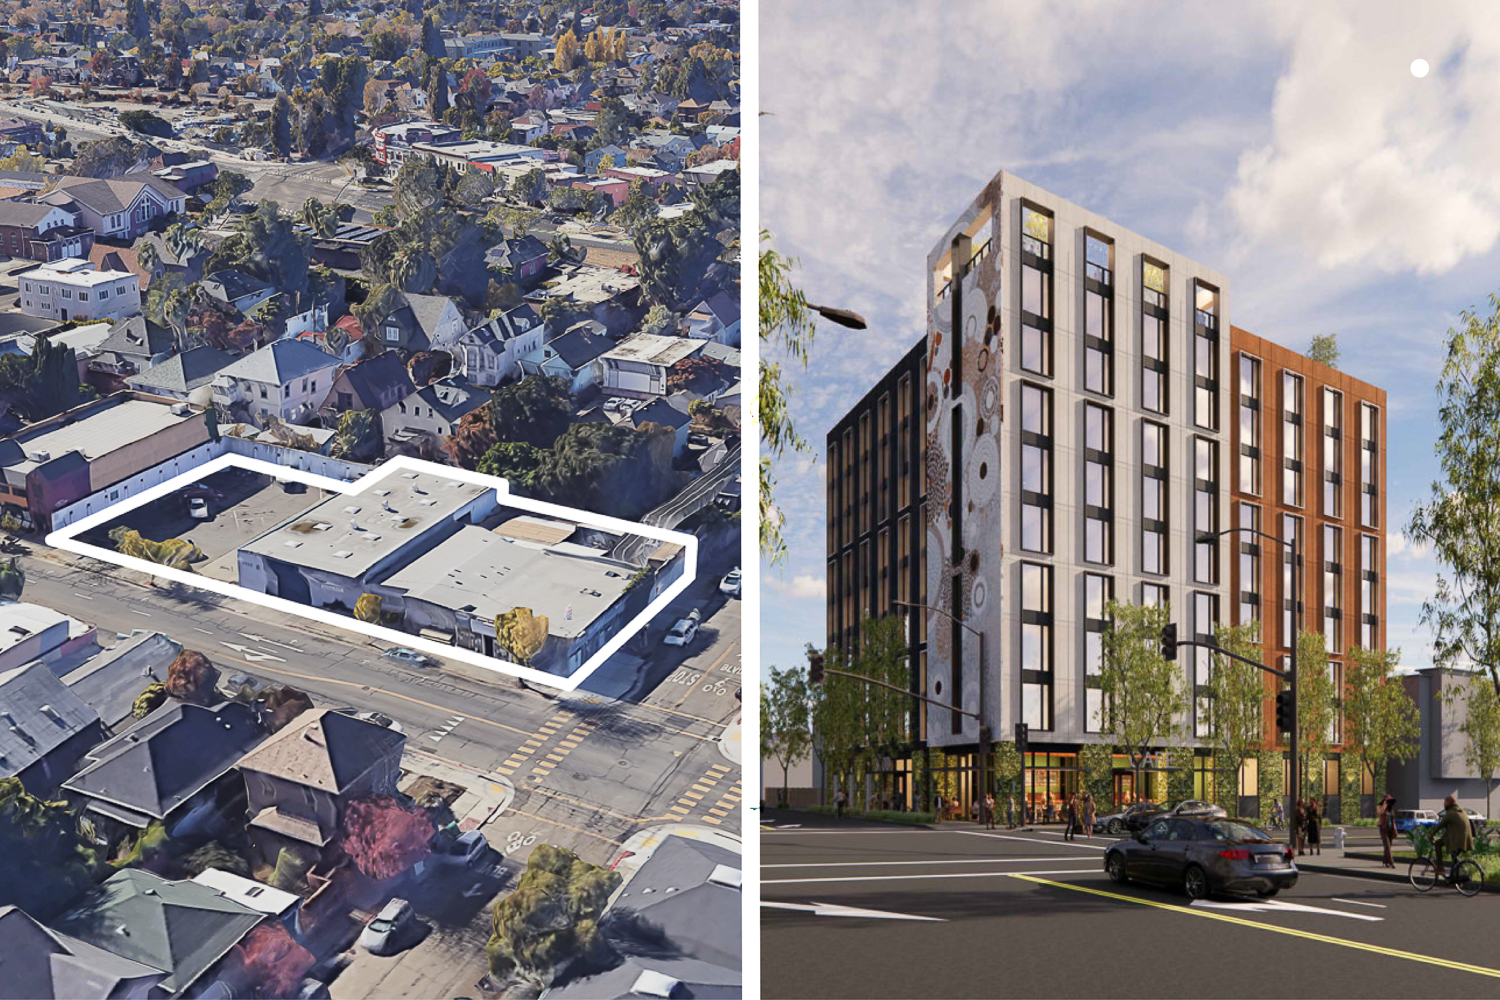 2920 Shattuck Avenue from Google Satellite (left) and rendering of 3000 Shattuck Avenue by Trachtenberg Architects (right)